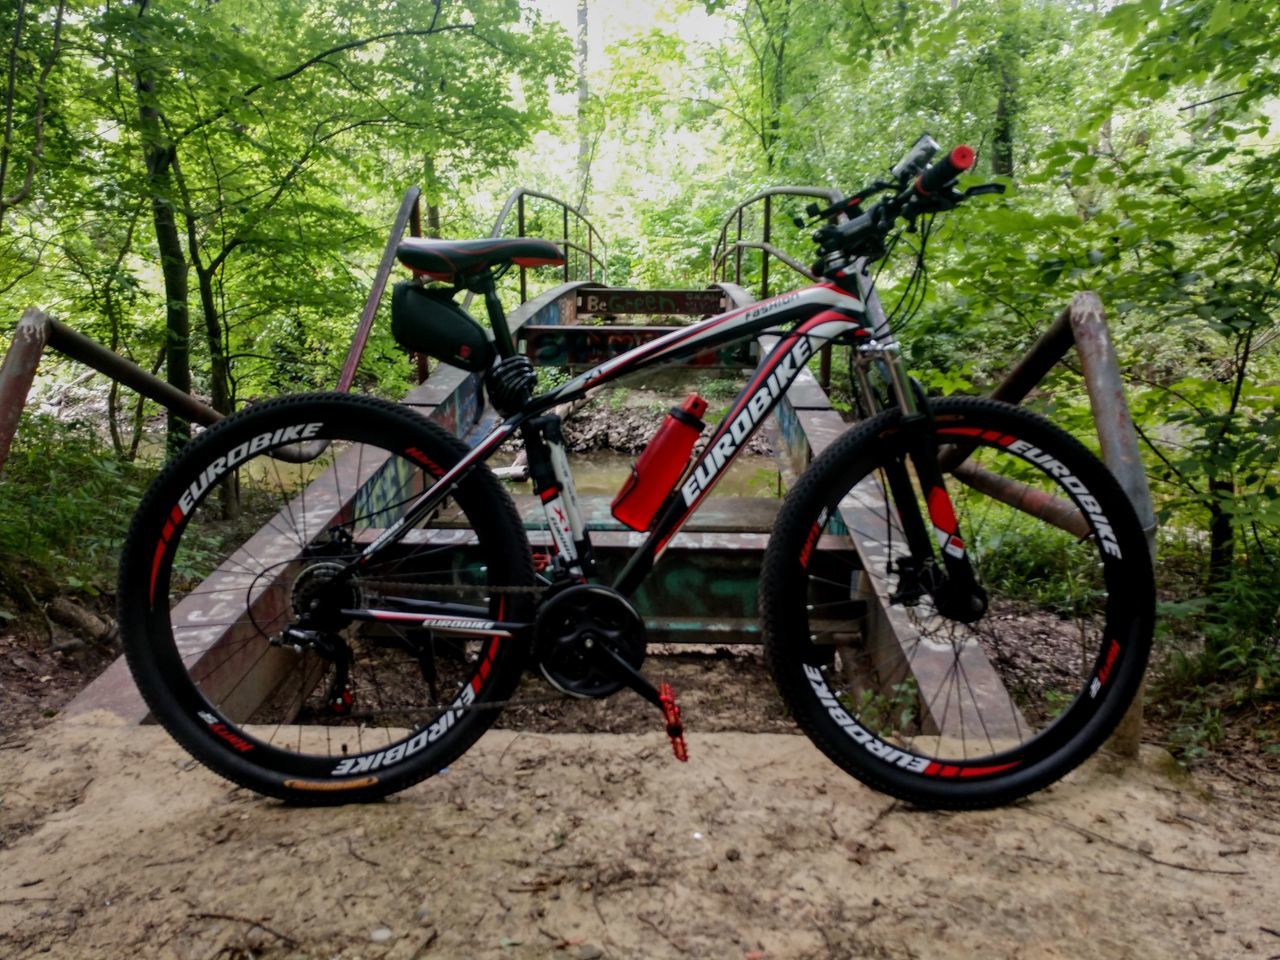 tree, bicycle, forest, transportation, day, mode of transportation, land, plant, no people, nature, land vehicle, outdoors, woodland, stationary, absence, wheel, non-urban scene, travel, landscape, field, tire